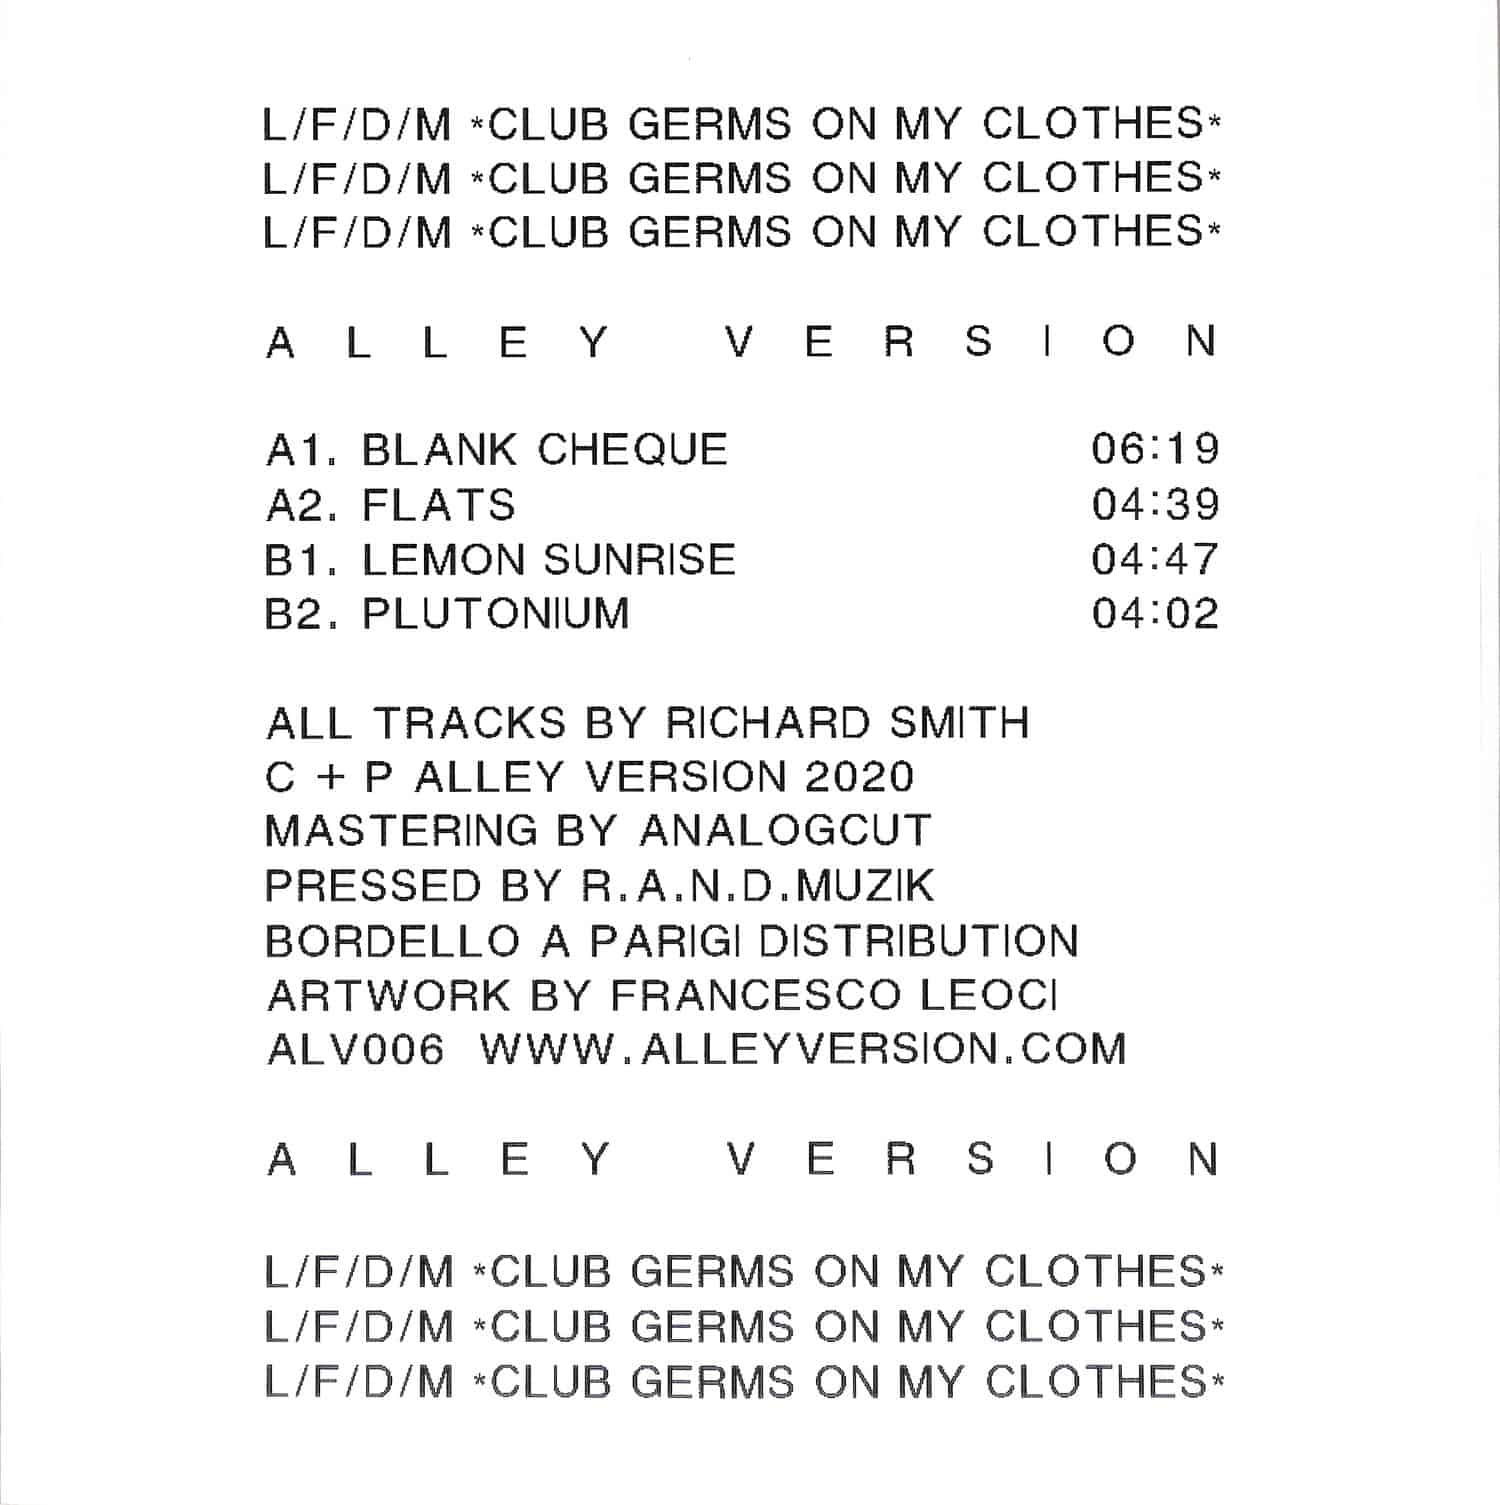 L/F/D/M - CLUB GERMS ON MY CLOTHES EP